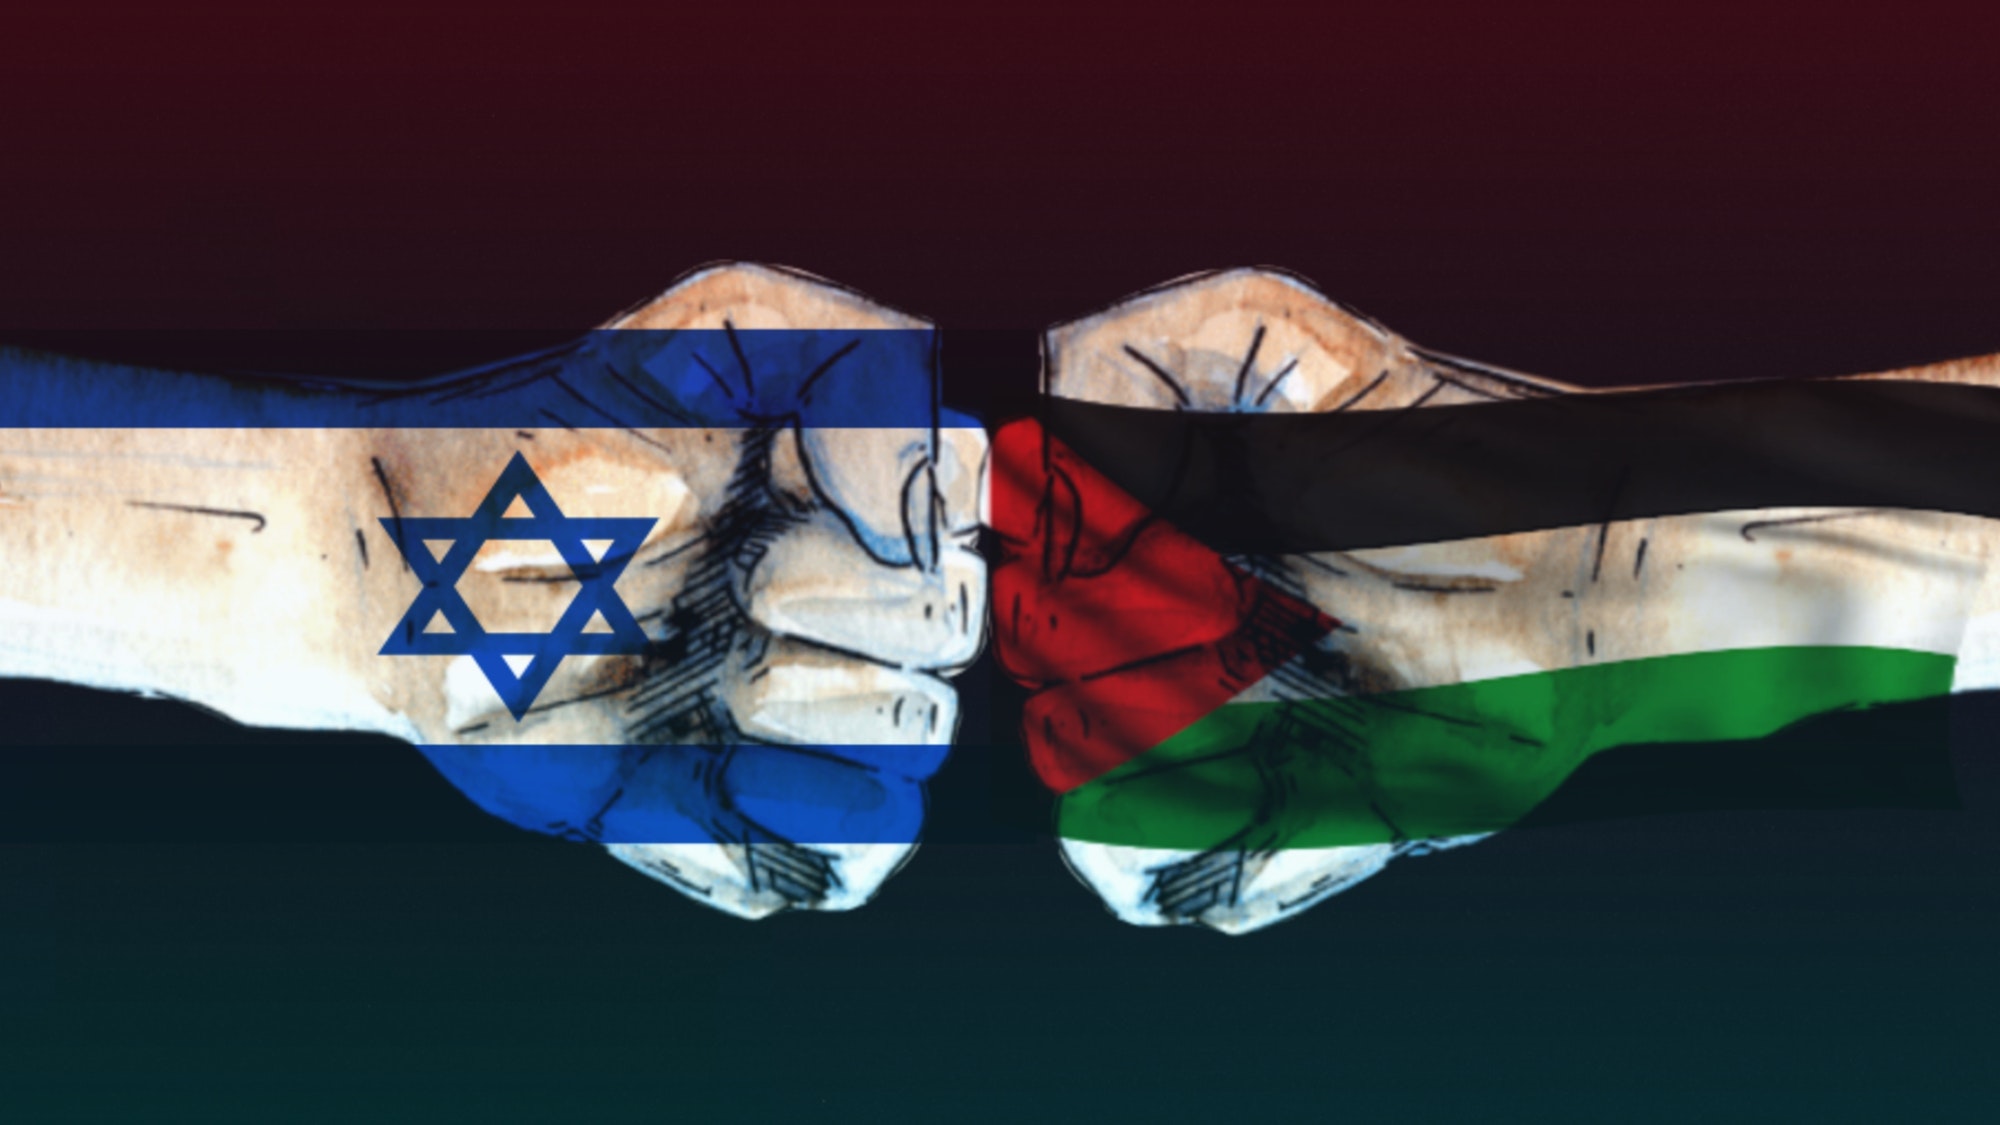 Israel and Palestine conflict or war situation reflect with flag and feast fight